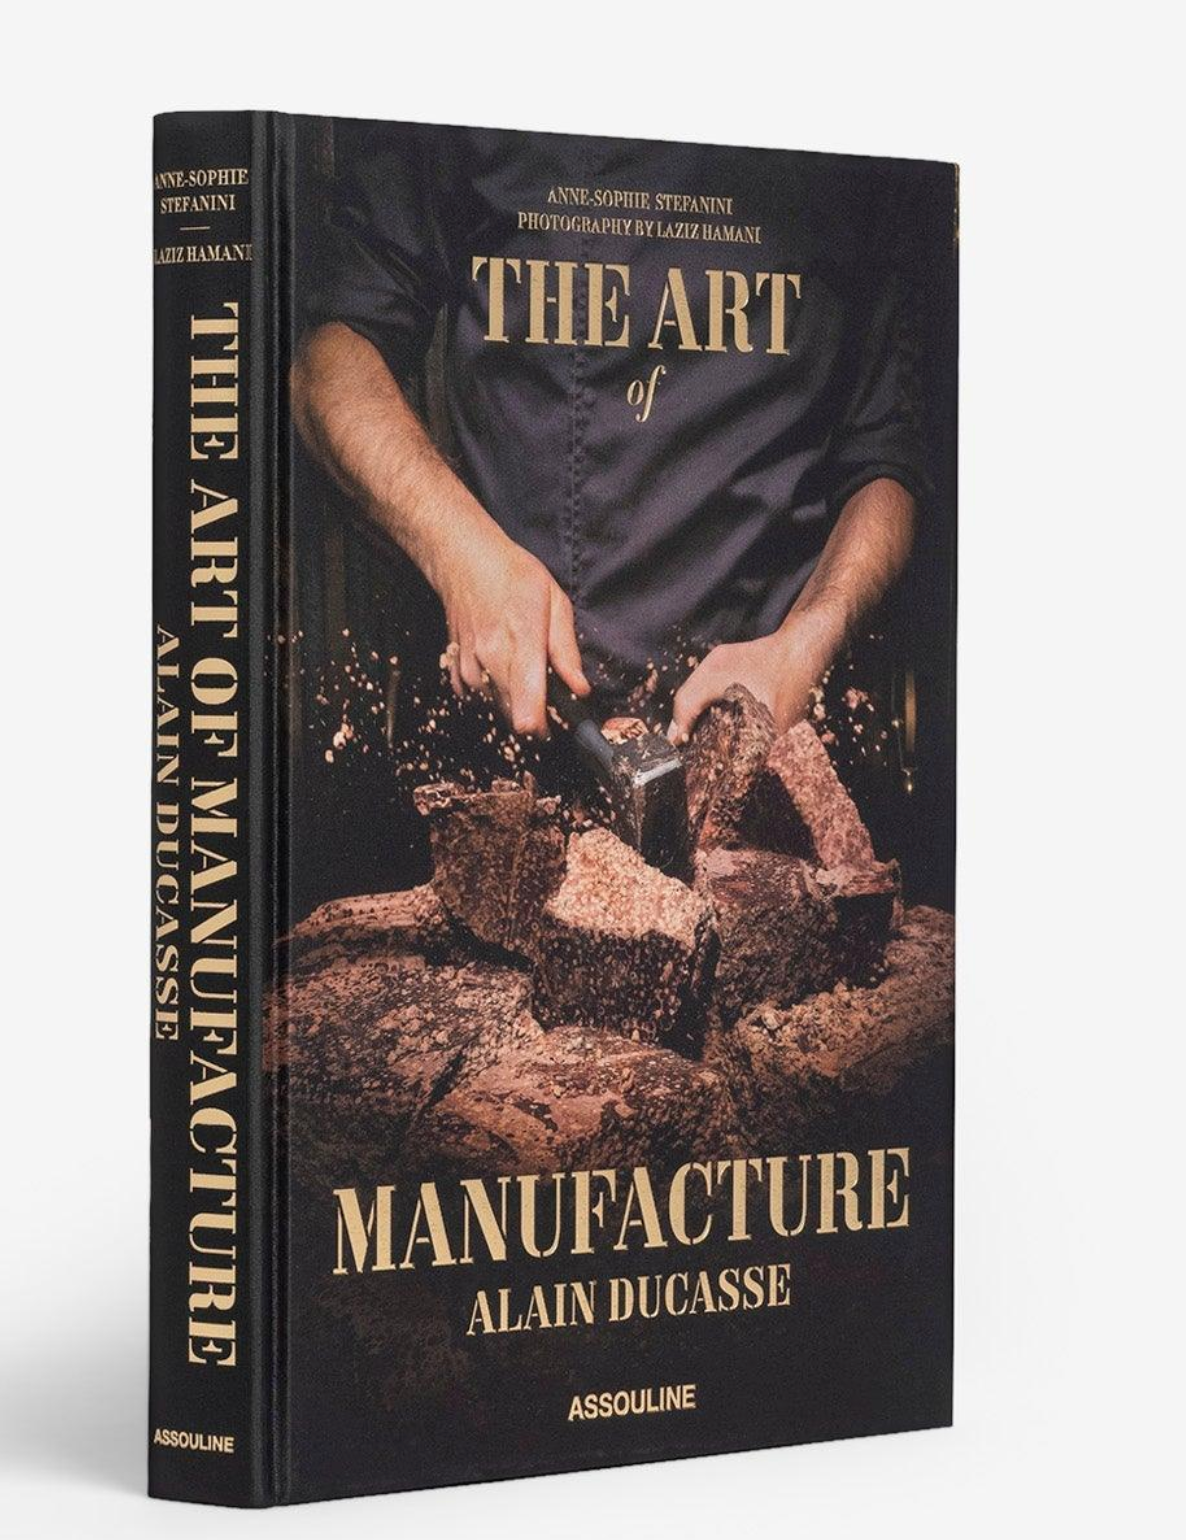 The Art of Manufacture Alain Ducasse